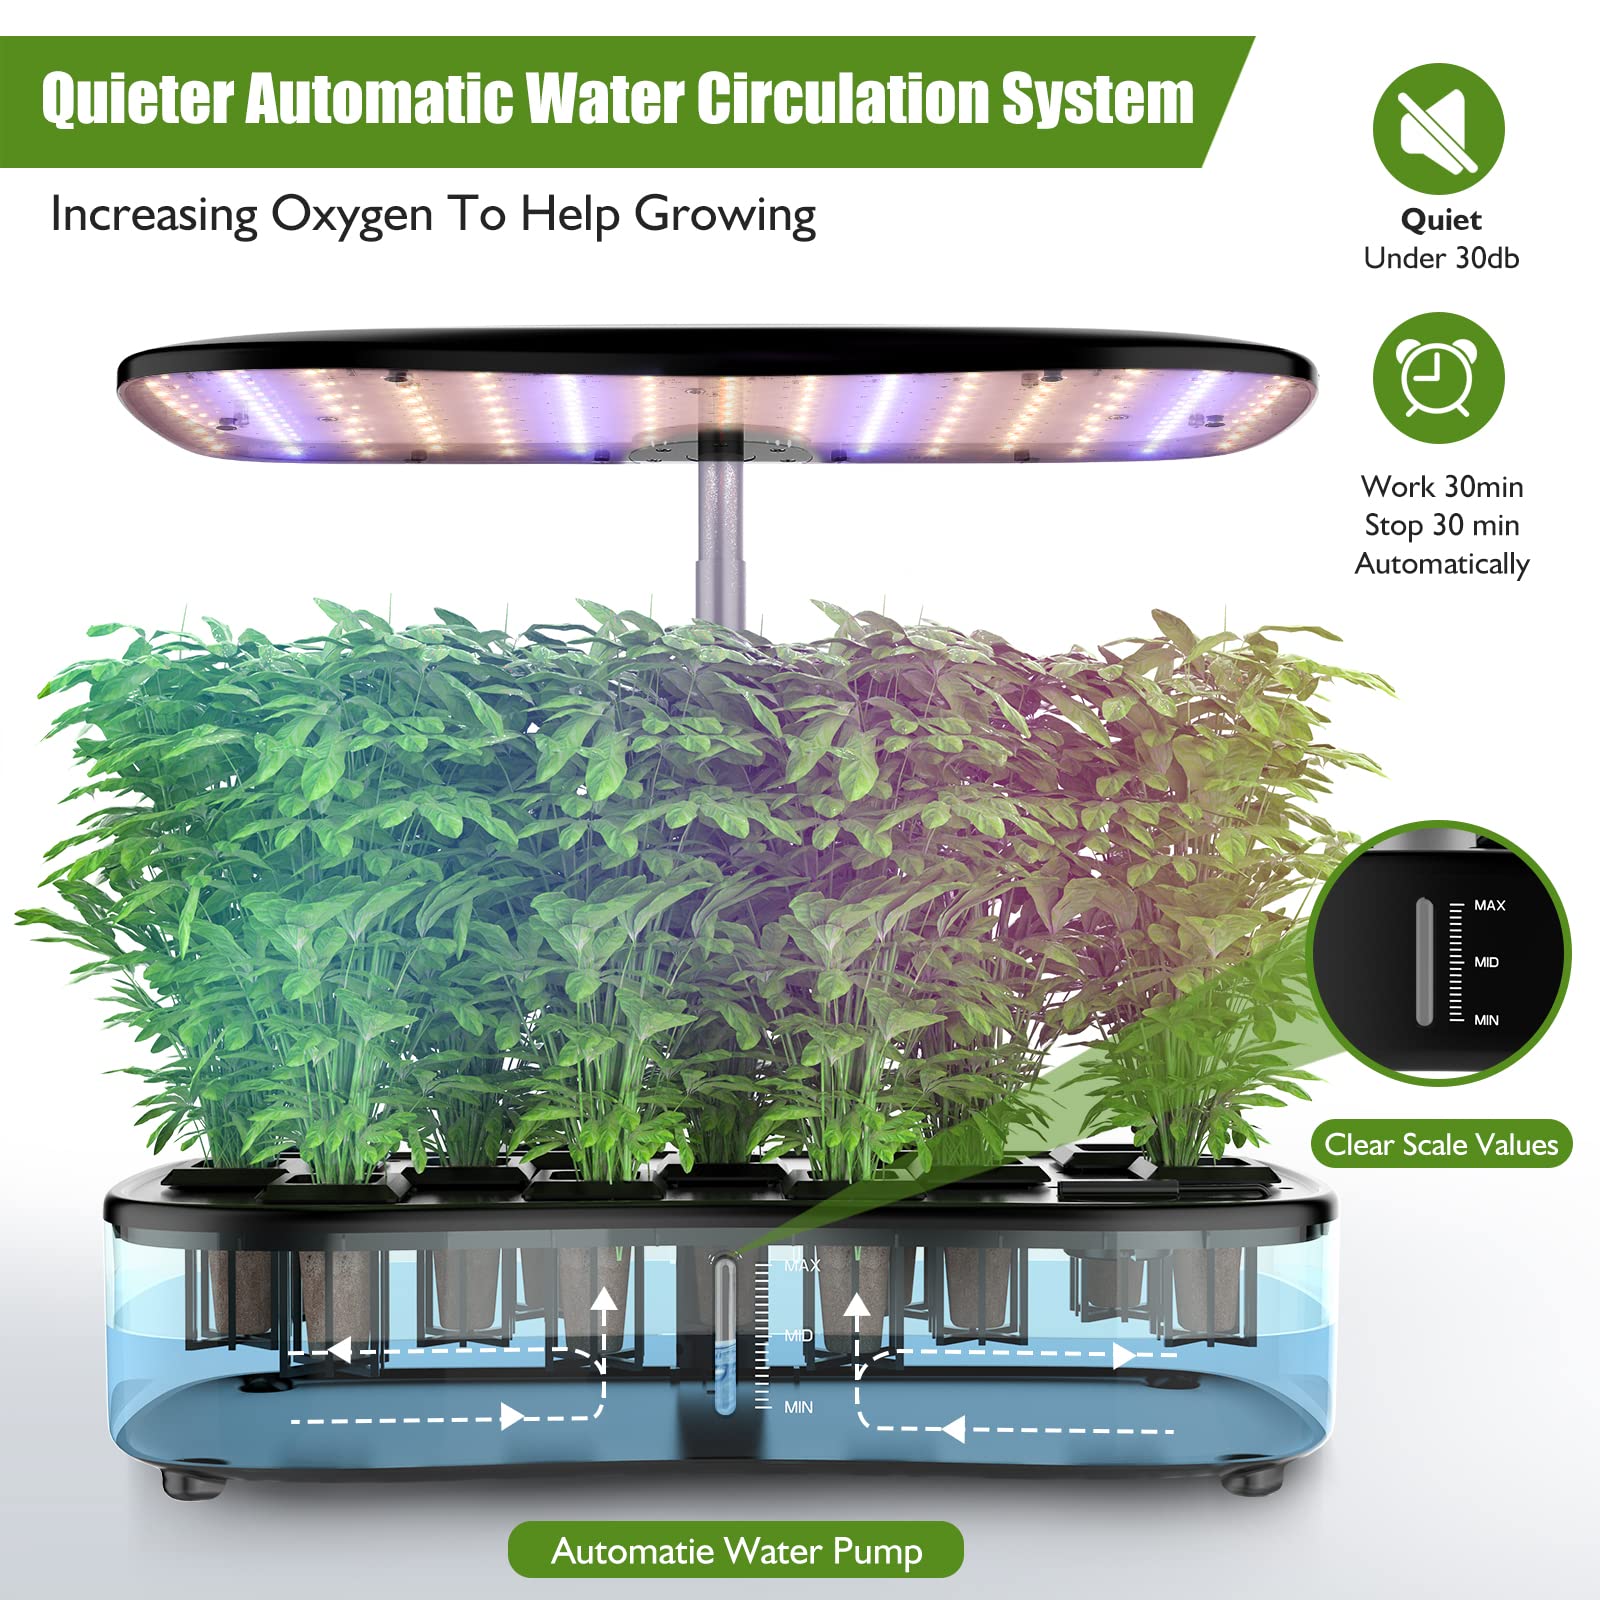 Find the highest-rated hydroponic gear on Amazon and take your gardening to new heights. Shop now for the best tools and accessories available.